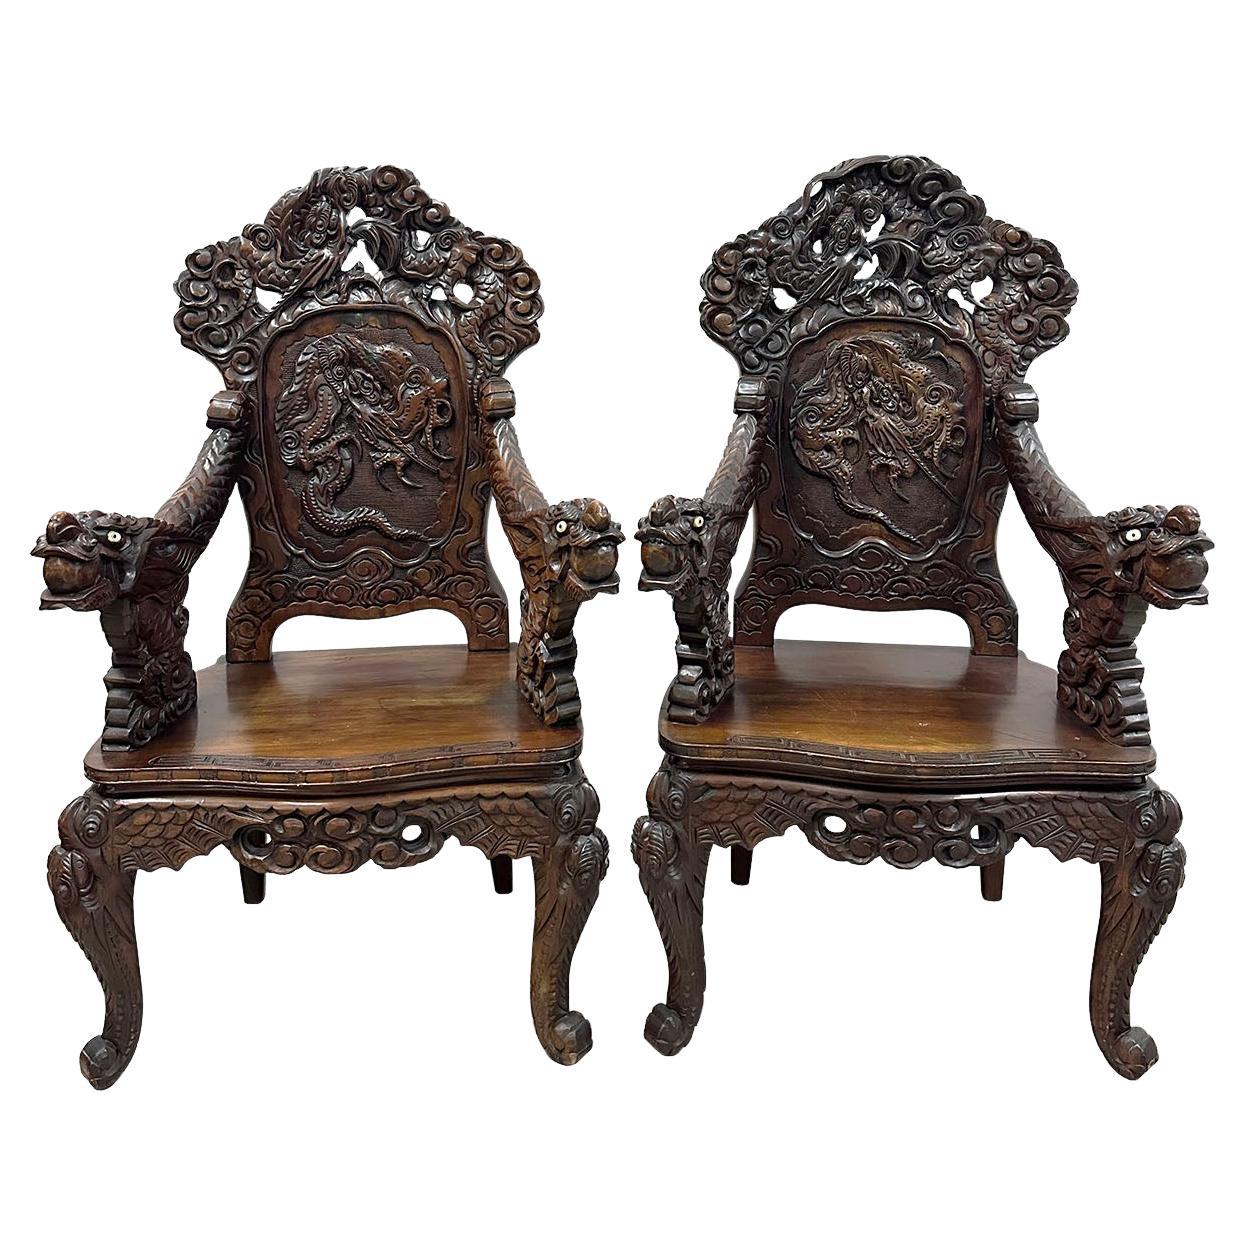 Pair of Antique Japanese Imperial Meiji High Relief Carved Dragon Throne Armchai